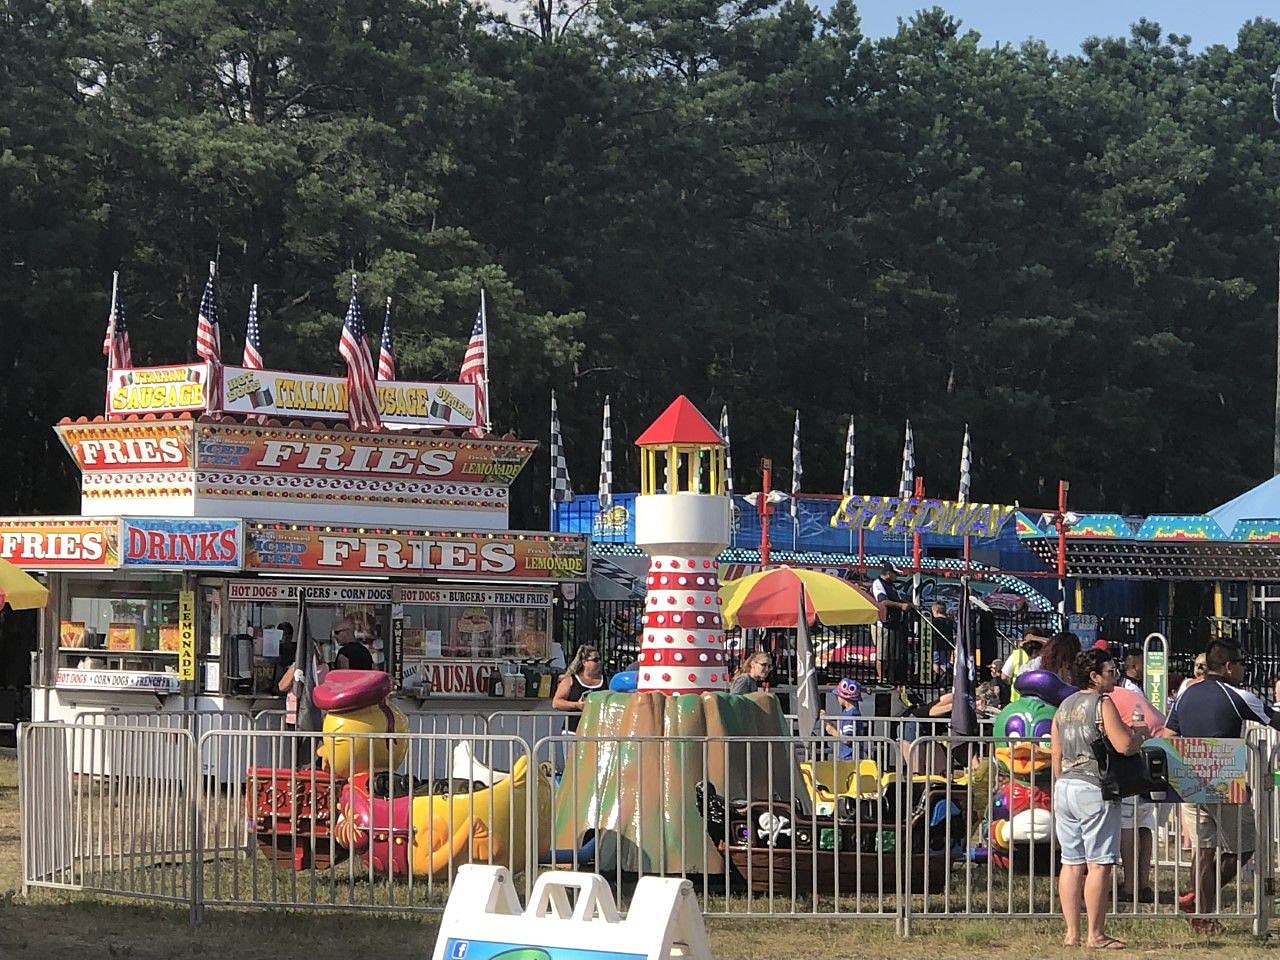 Fun Picture from the Ocean County Fair Don't Miss Out